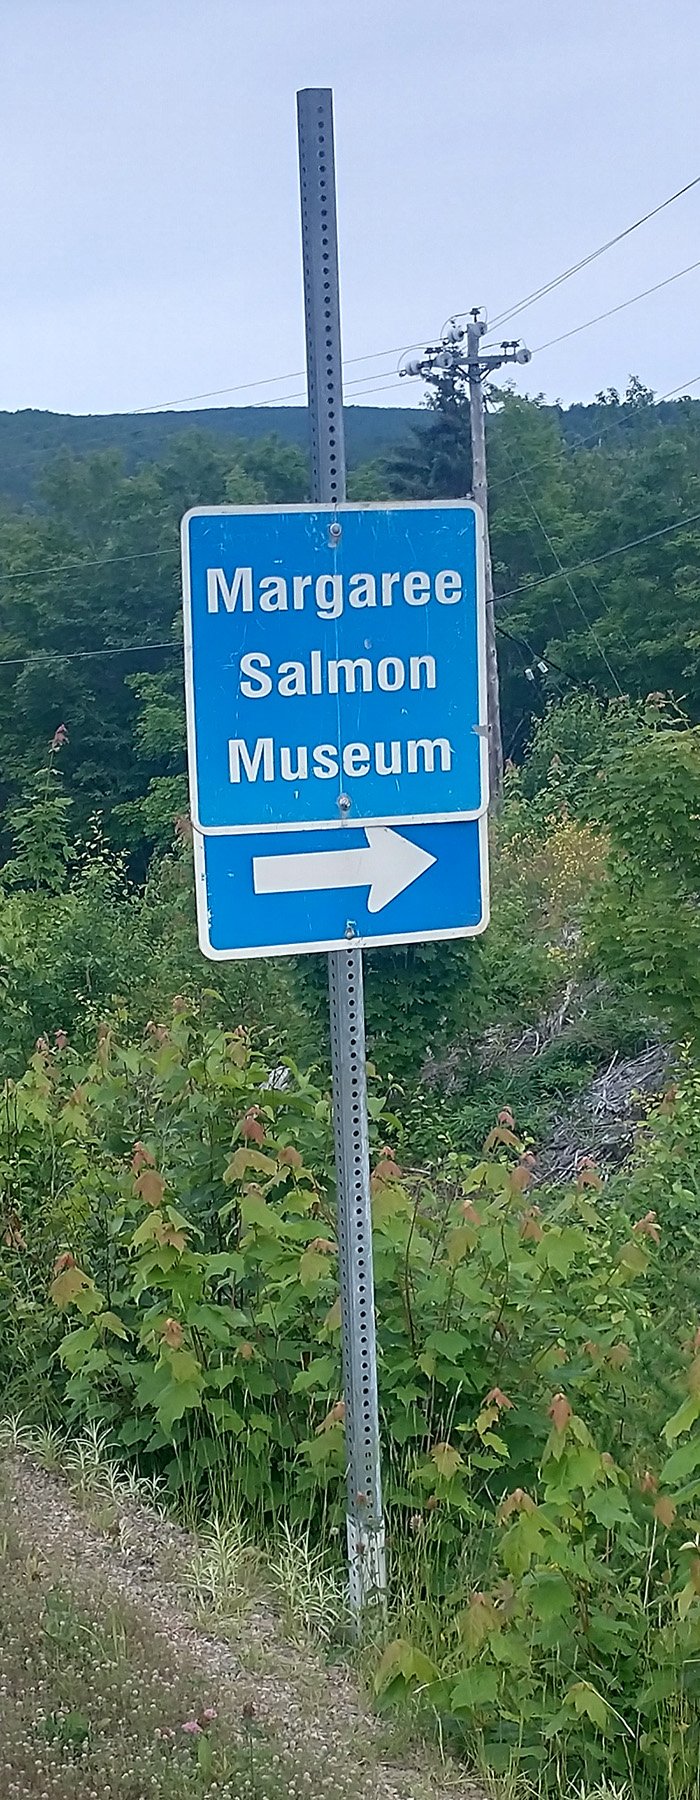 One of my biggest regrets. What wonders did the salmon museum hold? We'll never know.